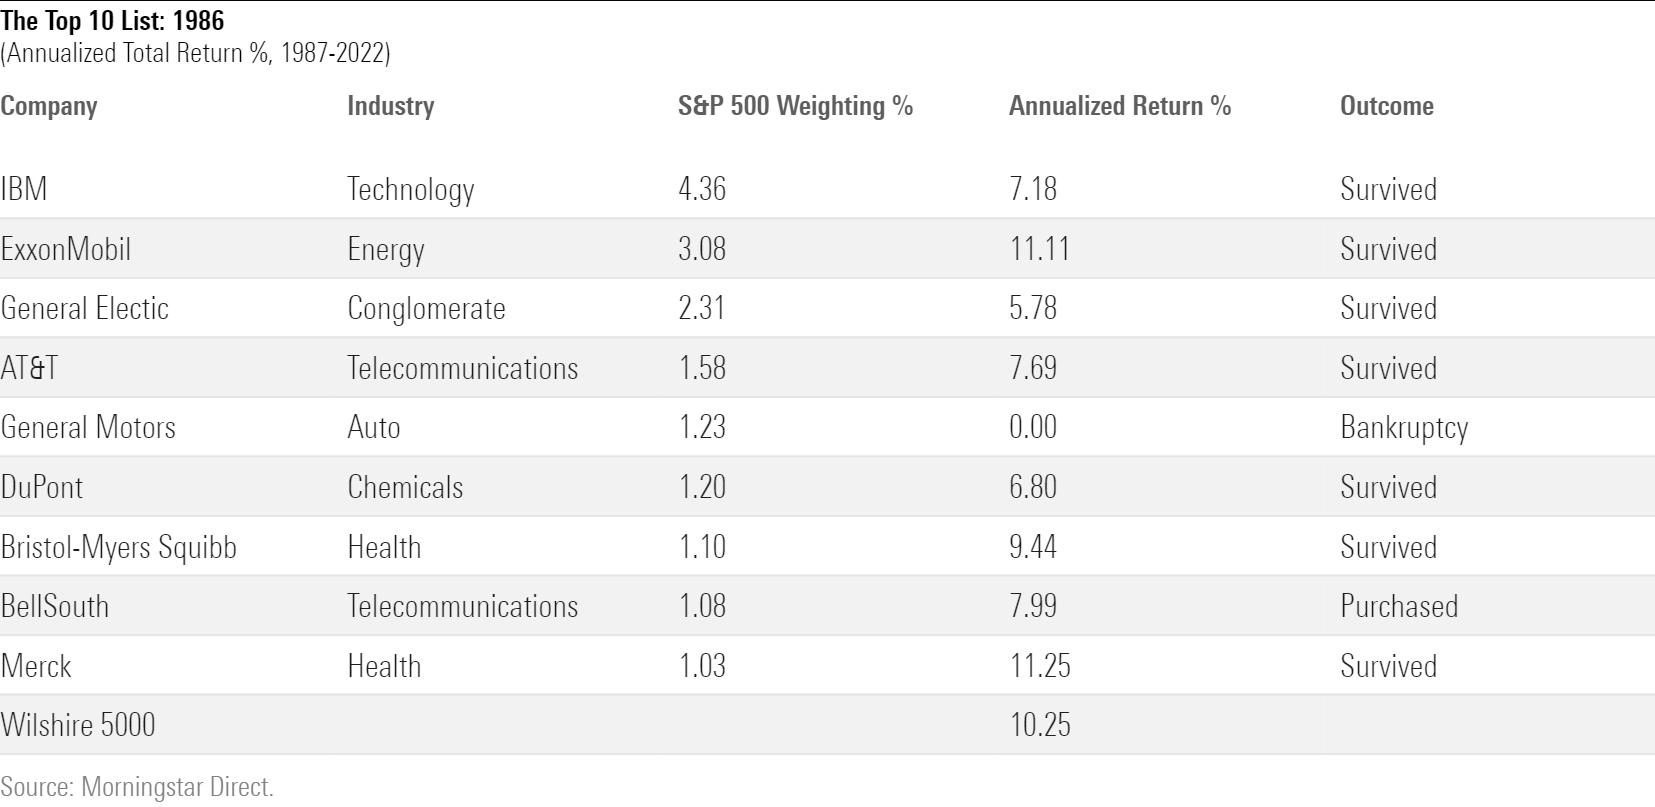 A table showing the largest listed U.S. stocks in December 1986, along with their industries, S&P 500 portfolio weightings, and annualized total returns  for the period from 1987 through 2022.